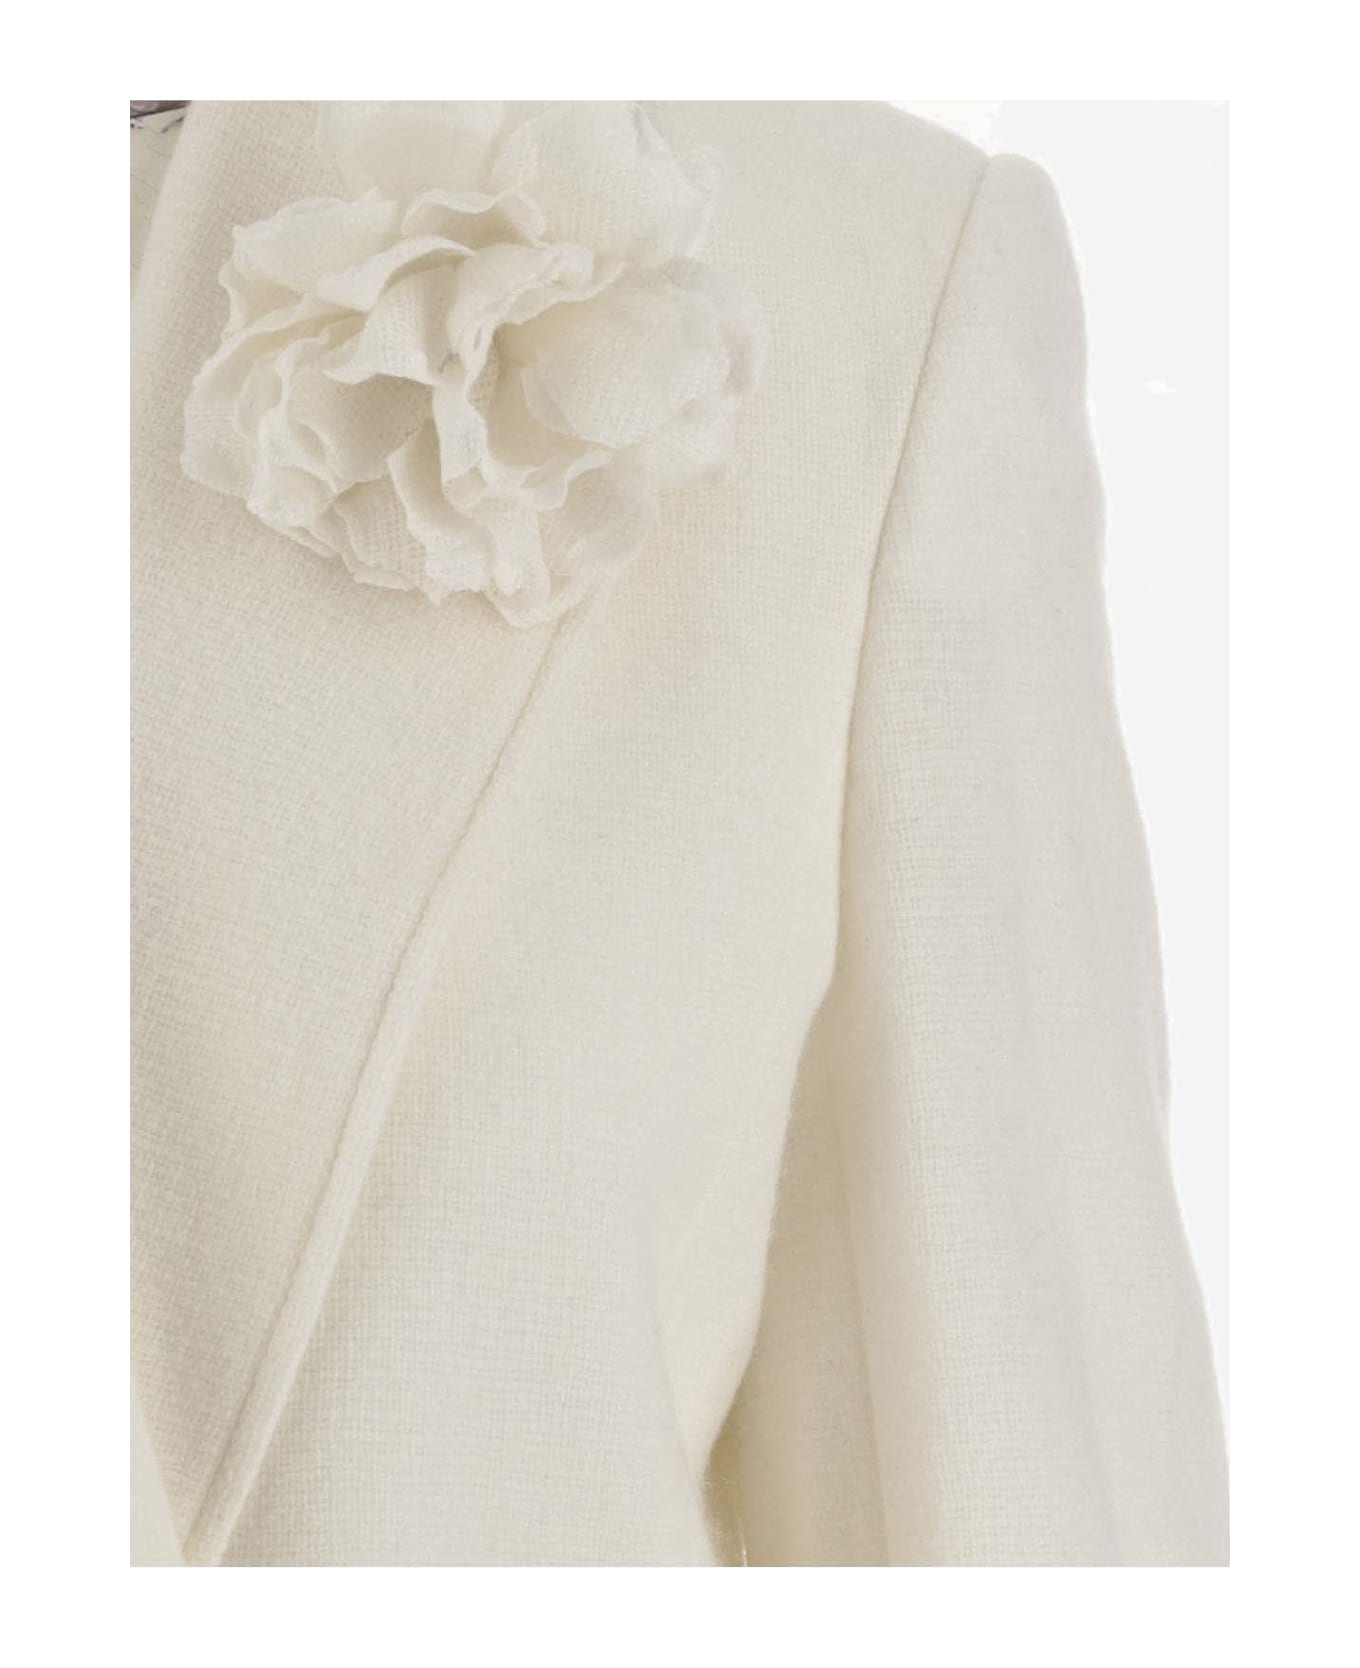 Chloé Wool And Cashmere Blend Jacket - White ブレザー